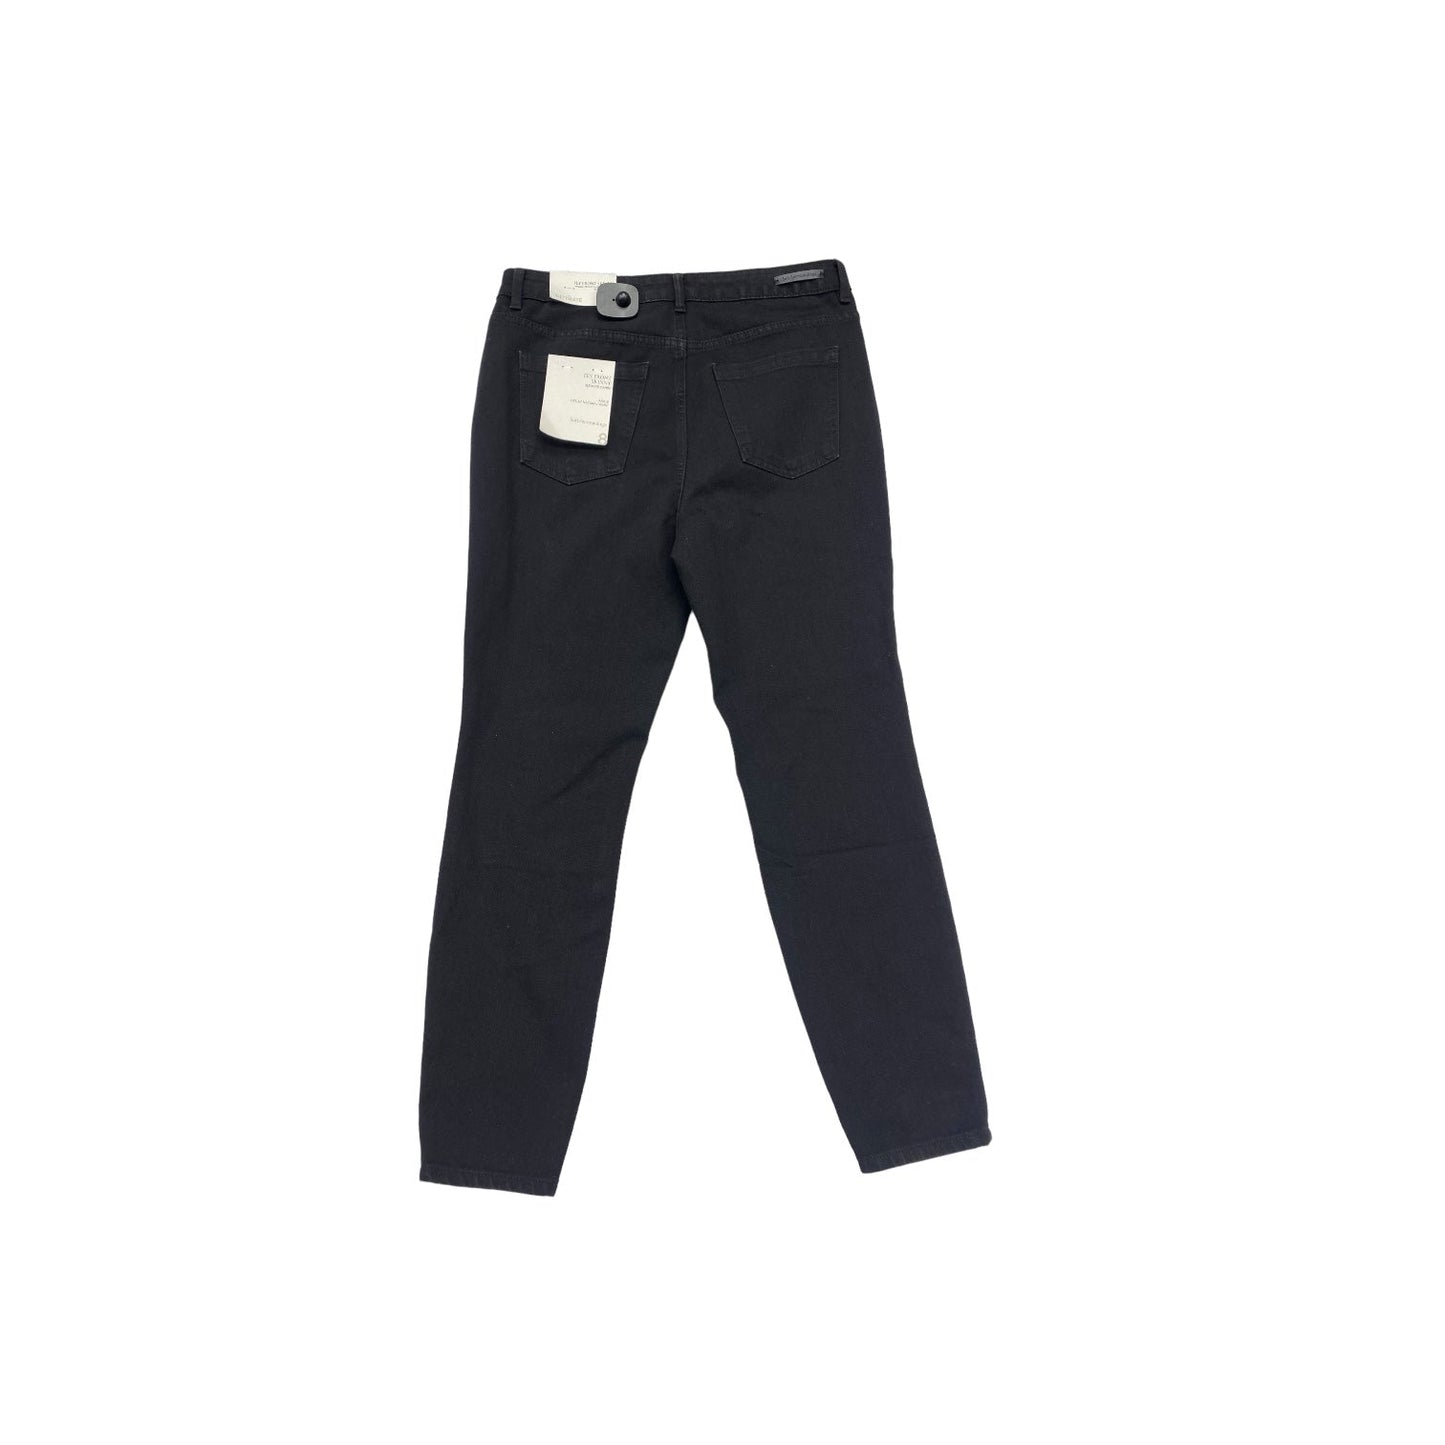 Pants Designer By Eileen Fisher  Size: M